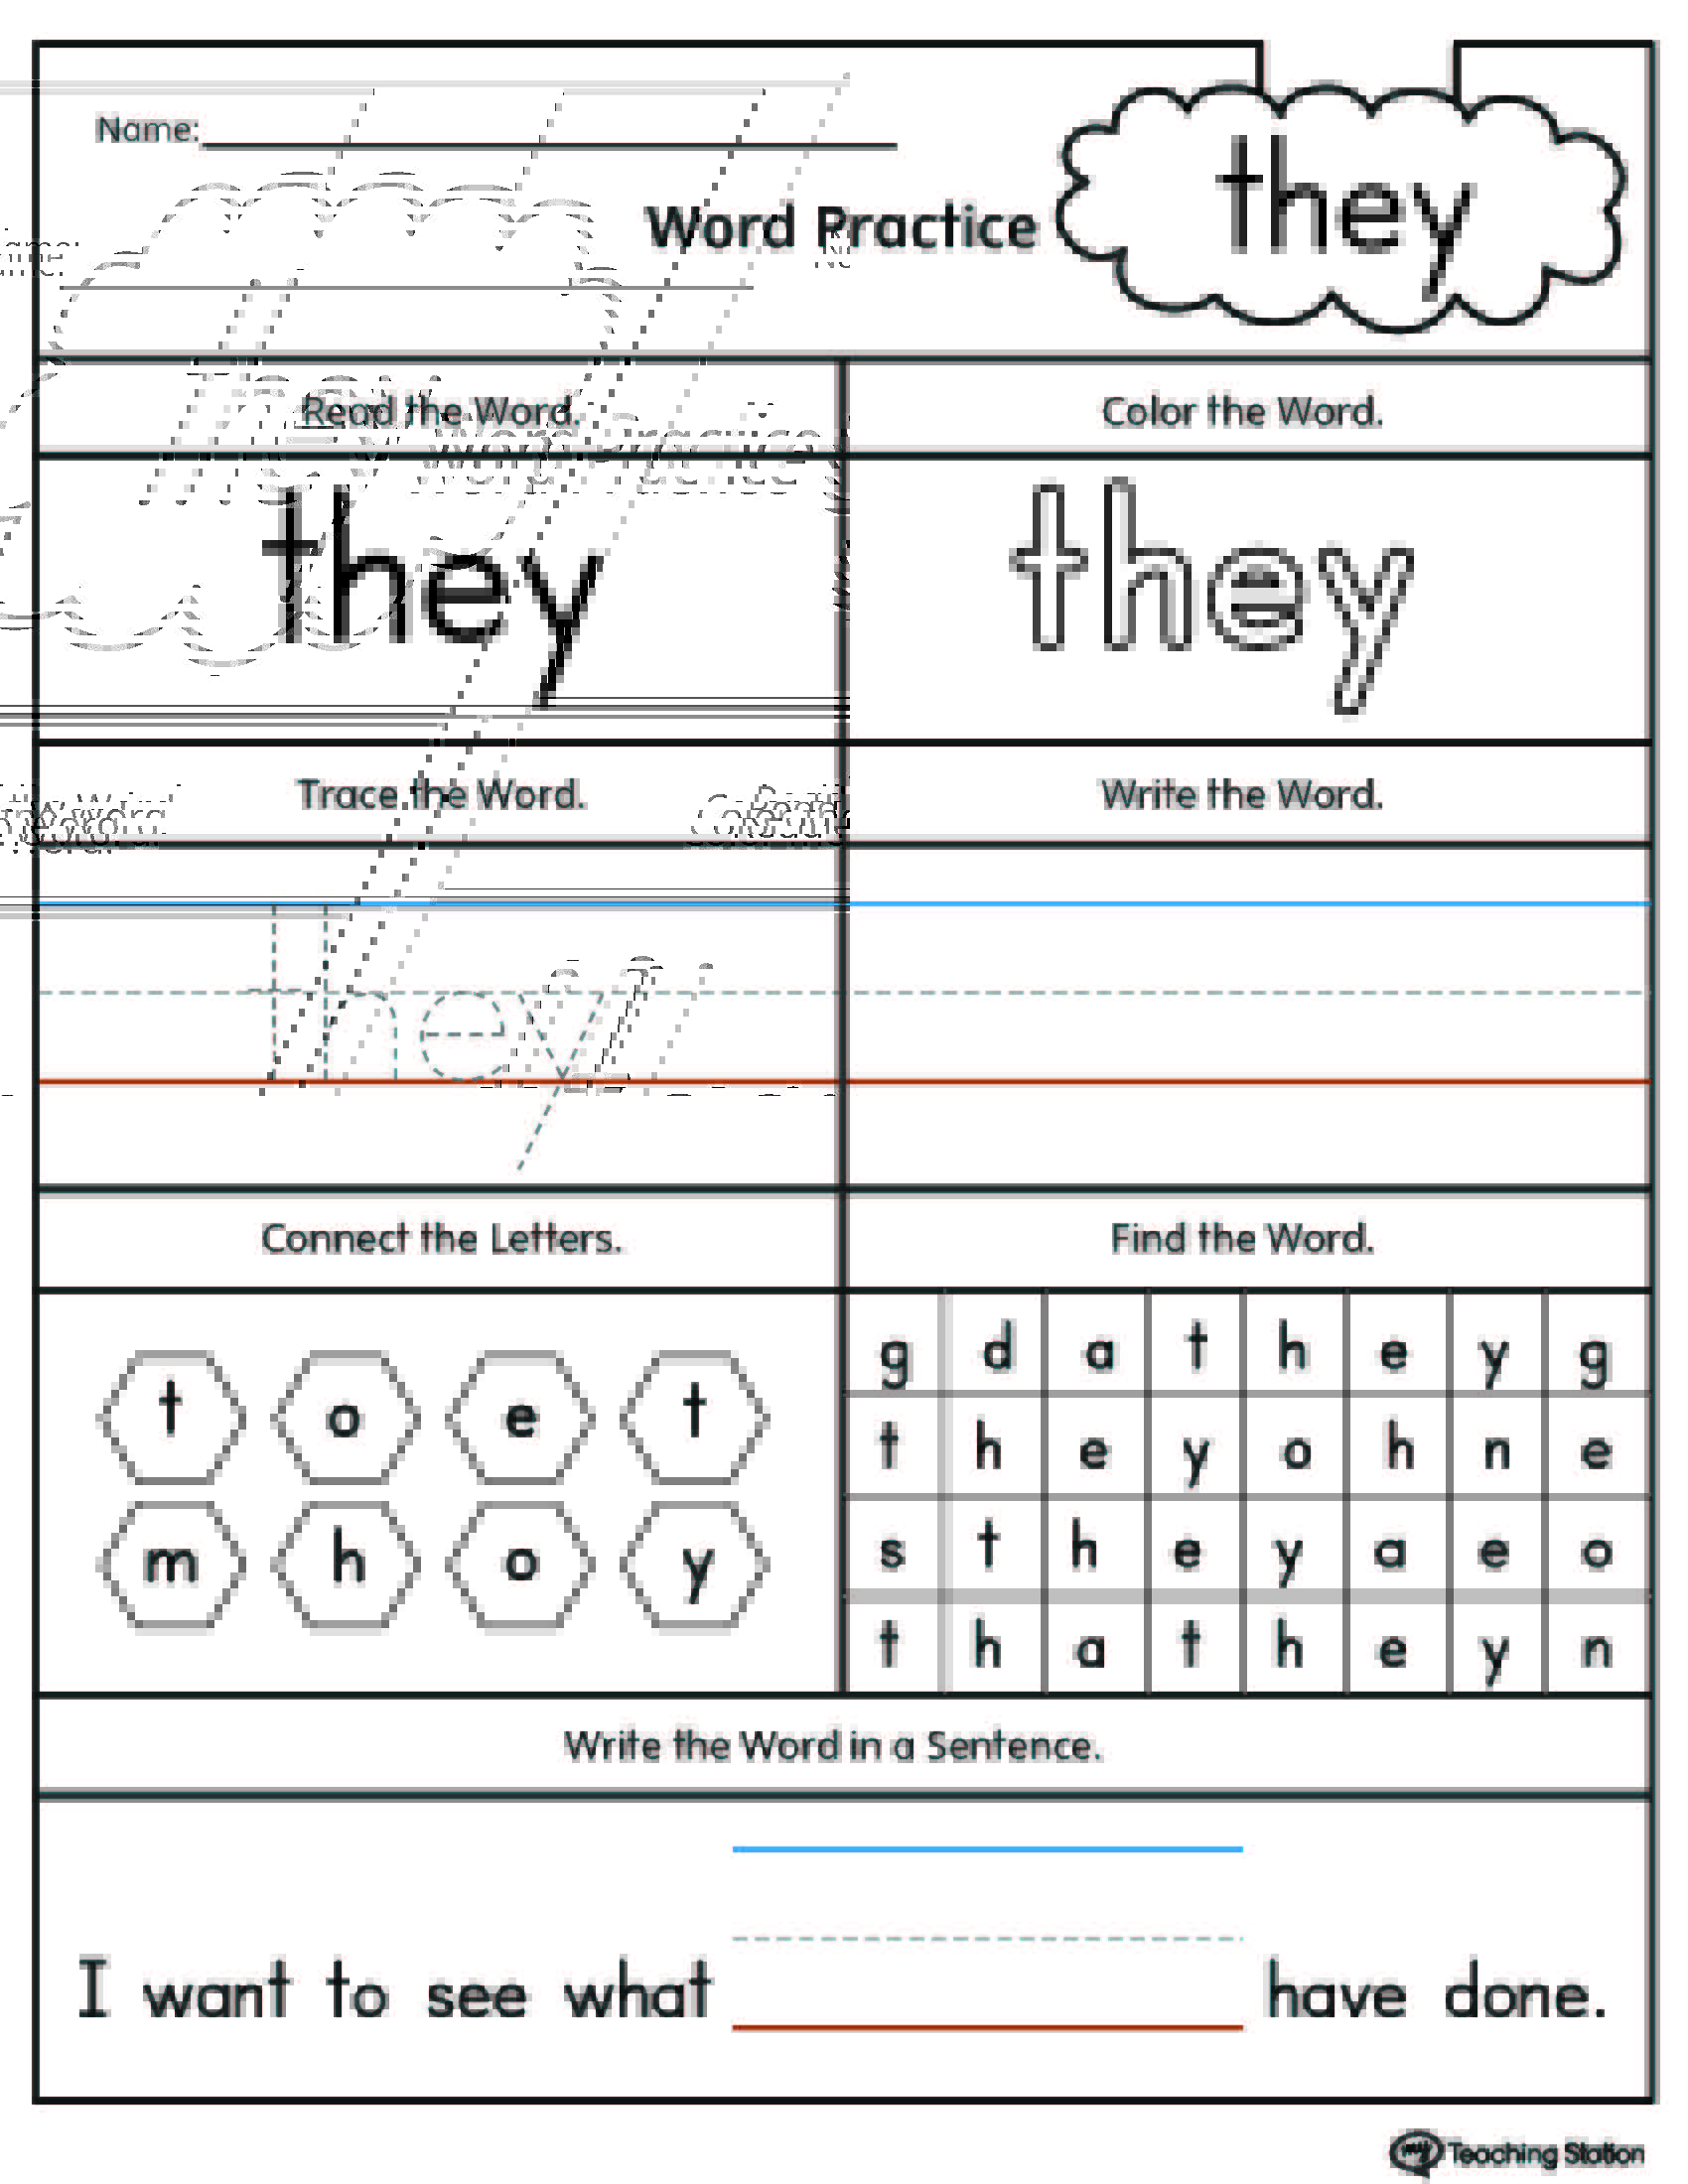 sight word we worksheets